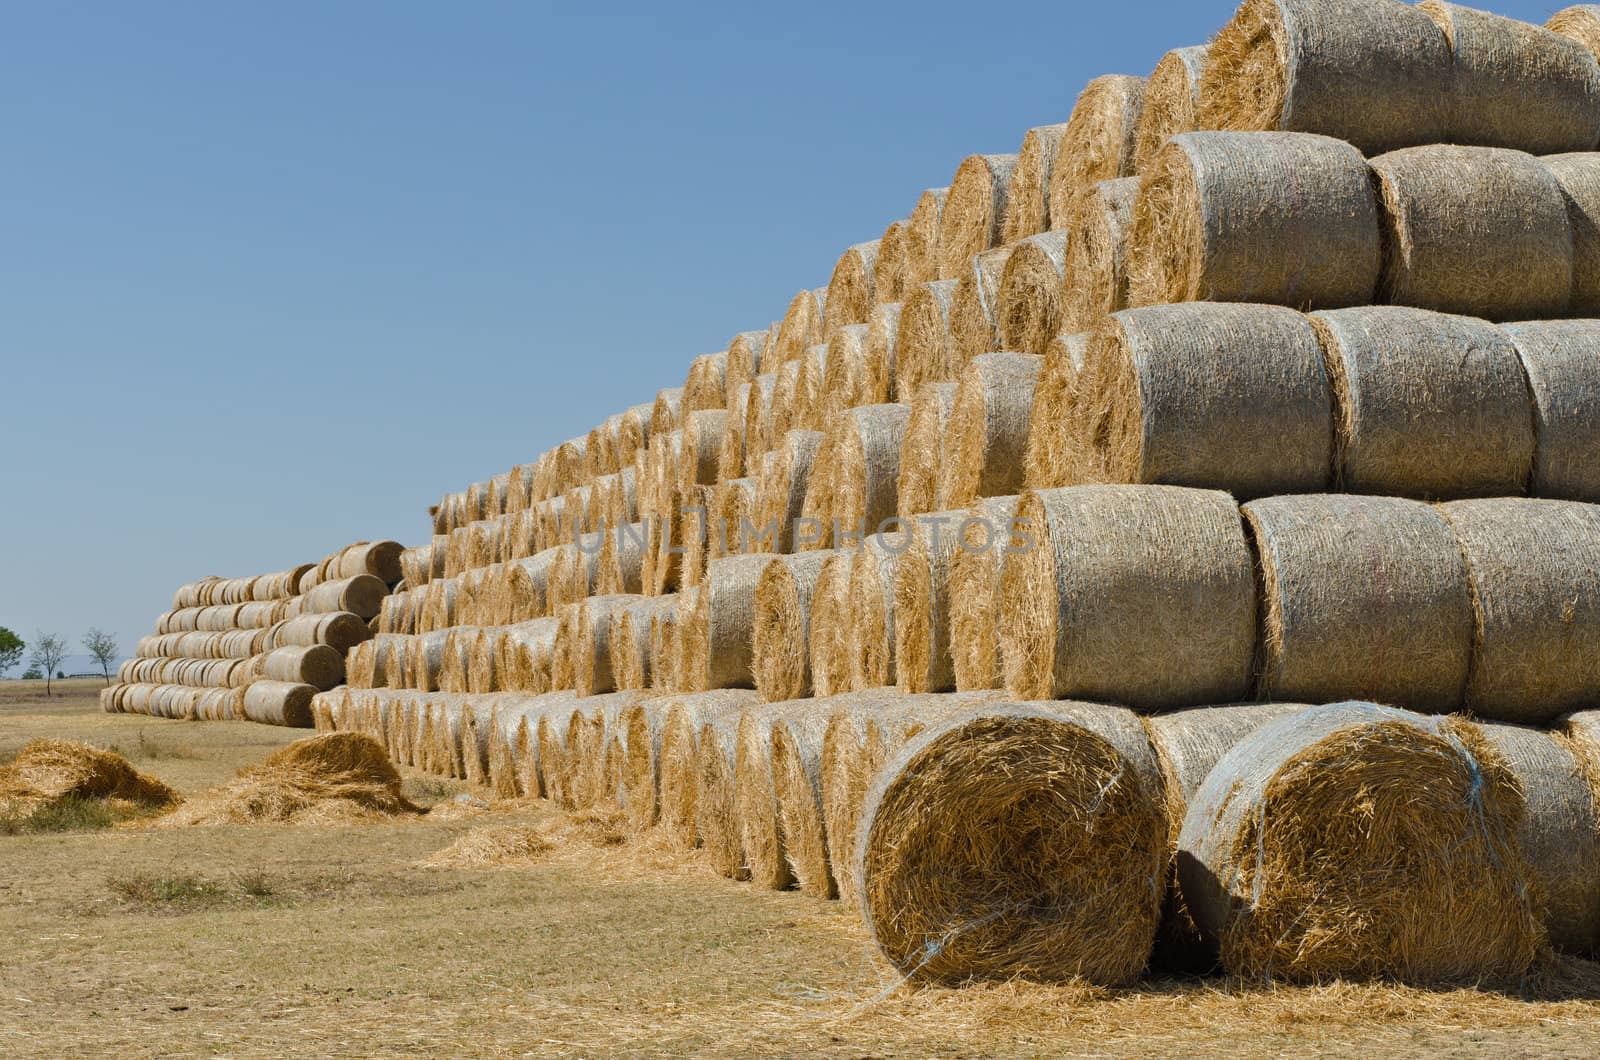 pasture straw and big stacks of hay bales on the cattle farm, horizontal shot